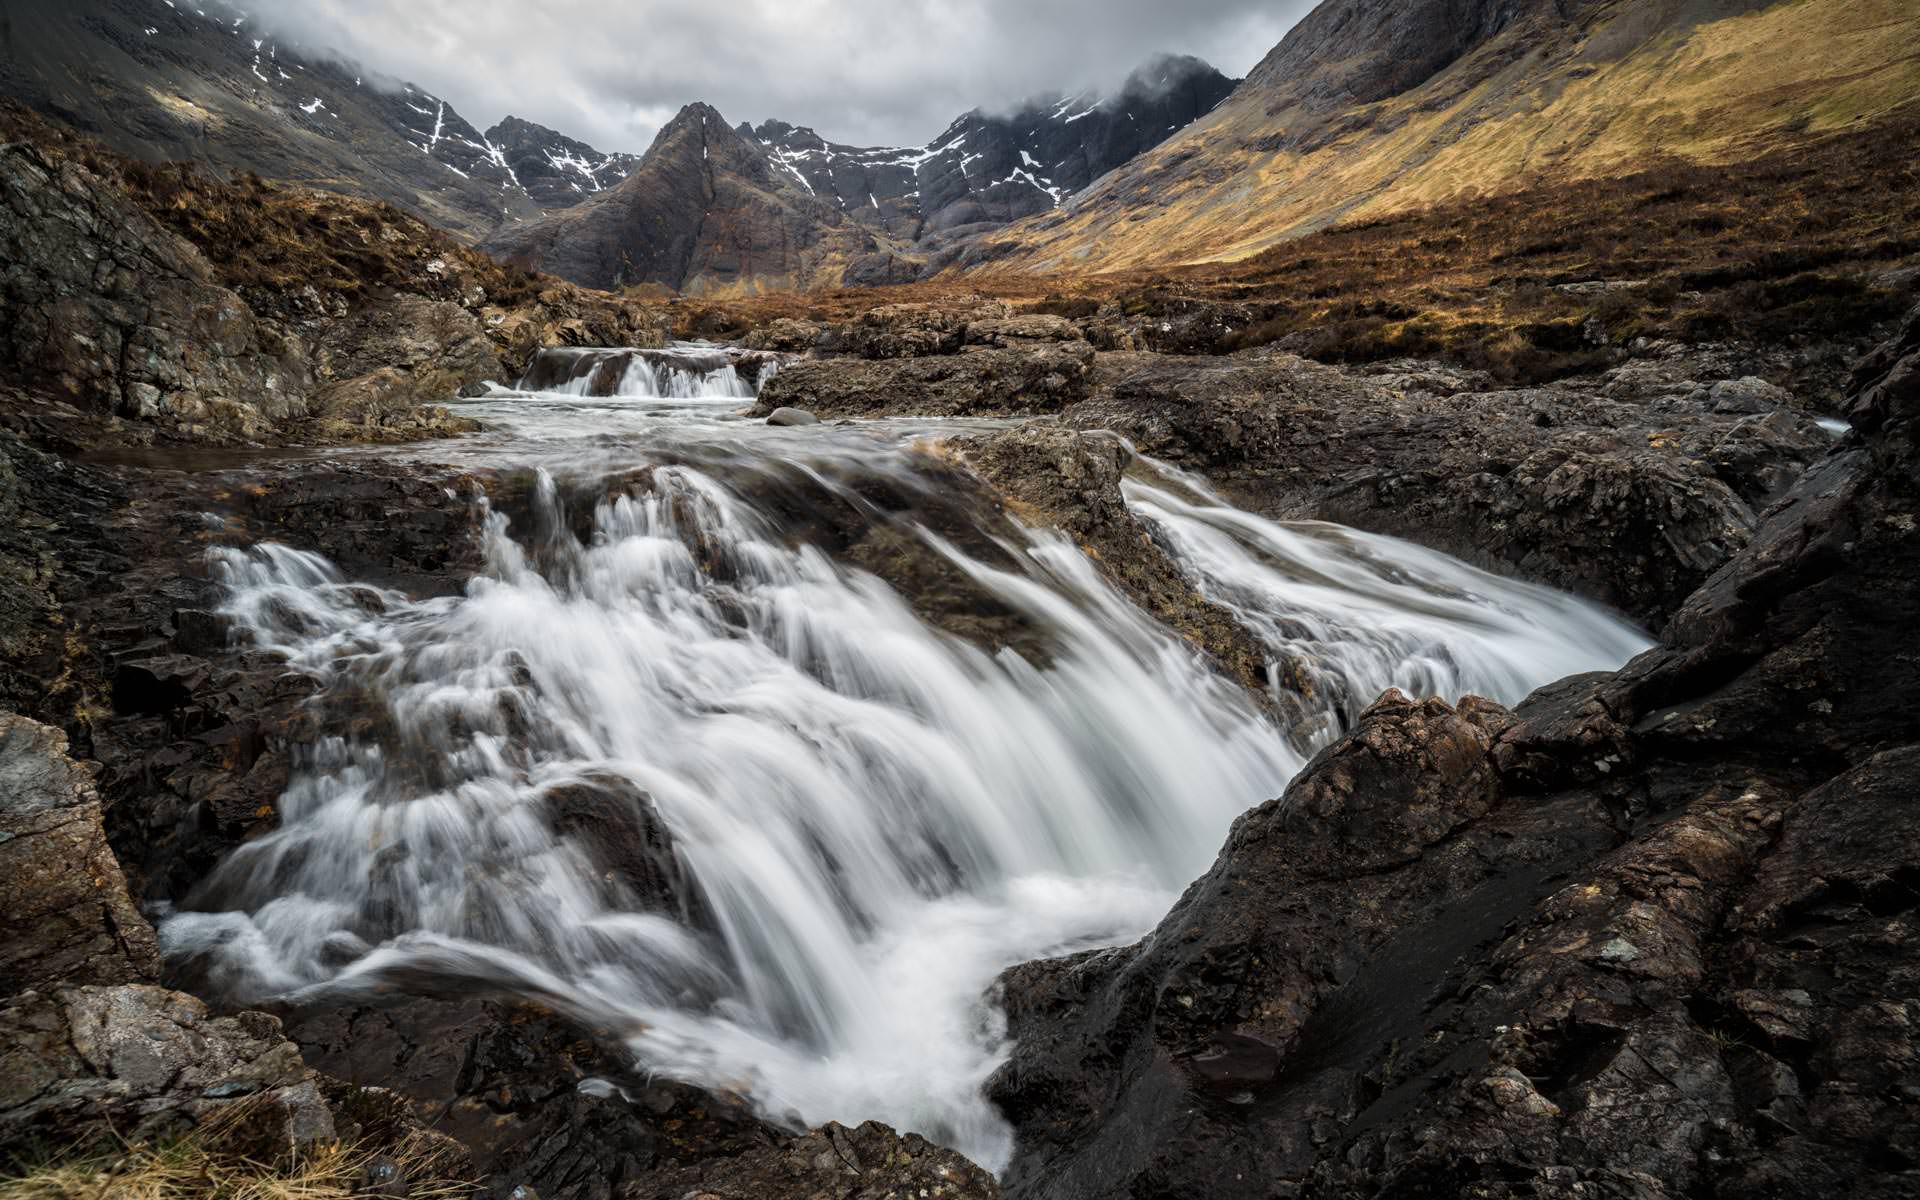 Moody Sky at the Fairy Pools - Landscape Photo